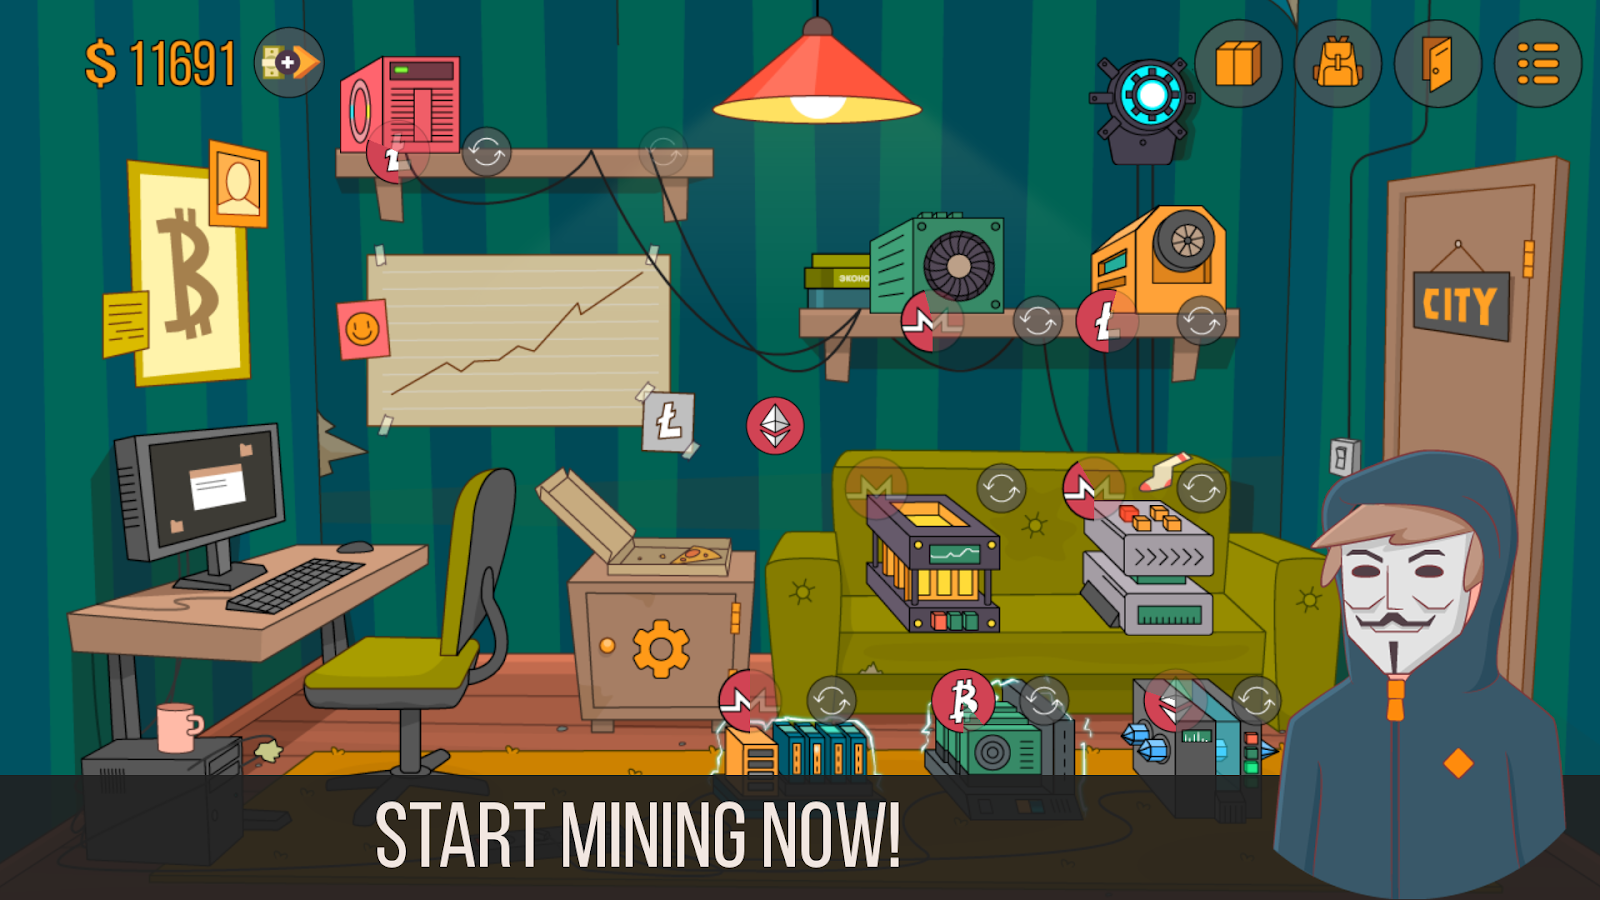 Download Idle Miner Simulator Tap Bitcoin Tycoon (MOD, Unlocked) v0.8.6 free on android